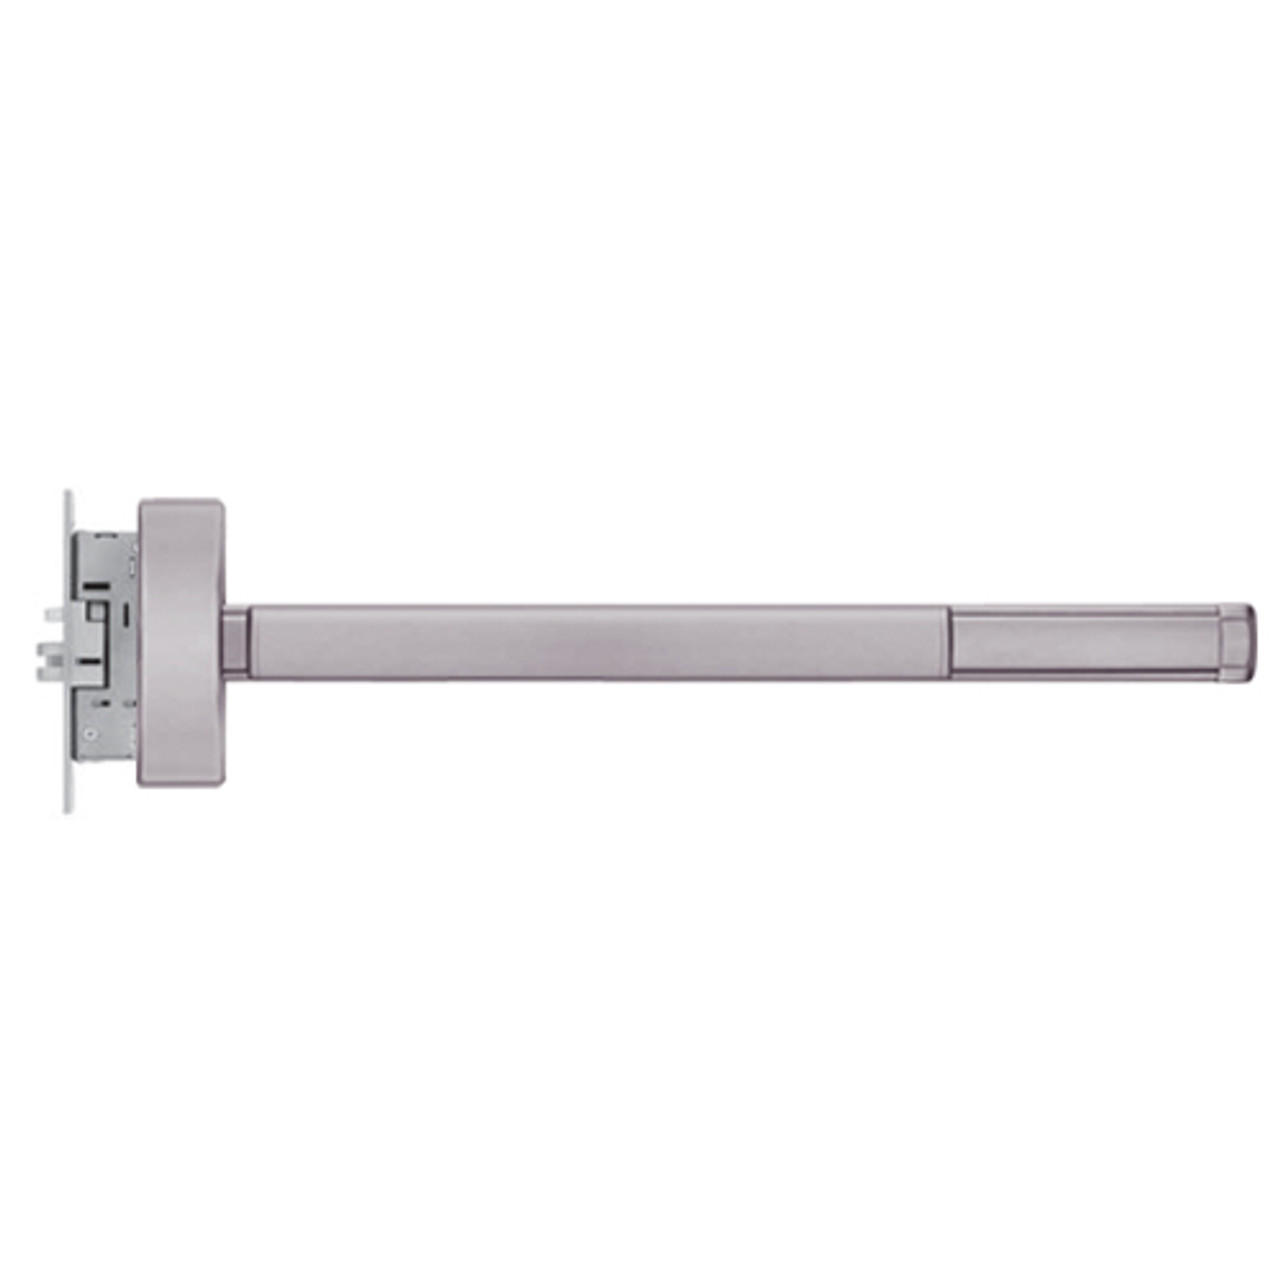 ELRFL2302-LHR-630-48 PHI 2300 Series Fire Rated Apex Mortise Exit Device with Electric Latch Retraction Prepped for Dummy Trim in Satin Stainless Steel Finish